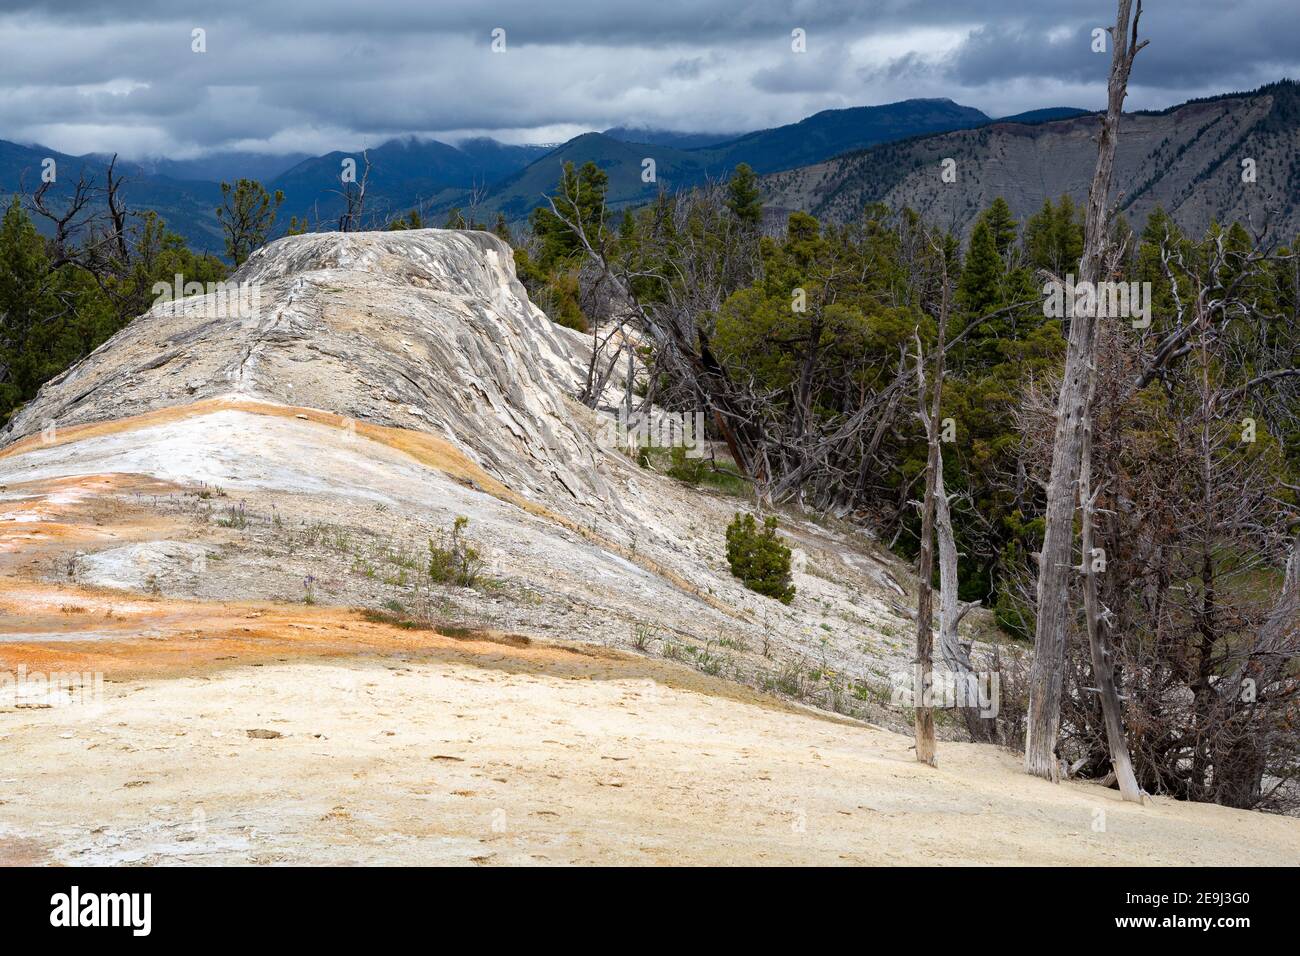 White Elephant Back Terrace rising into the distance above the trees at Mammoth Hot Springs. Yellowstone National Park, Wyoming Stock Photo